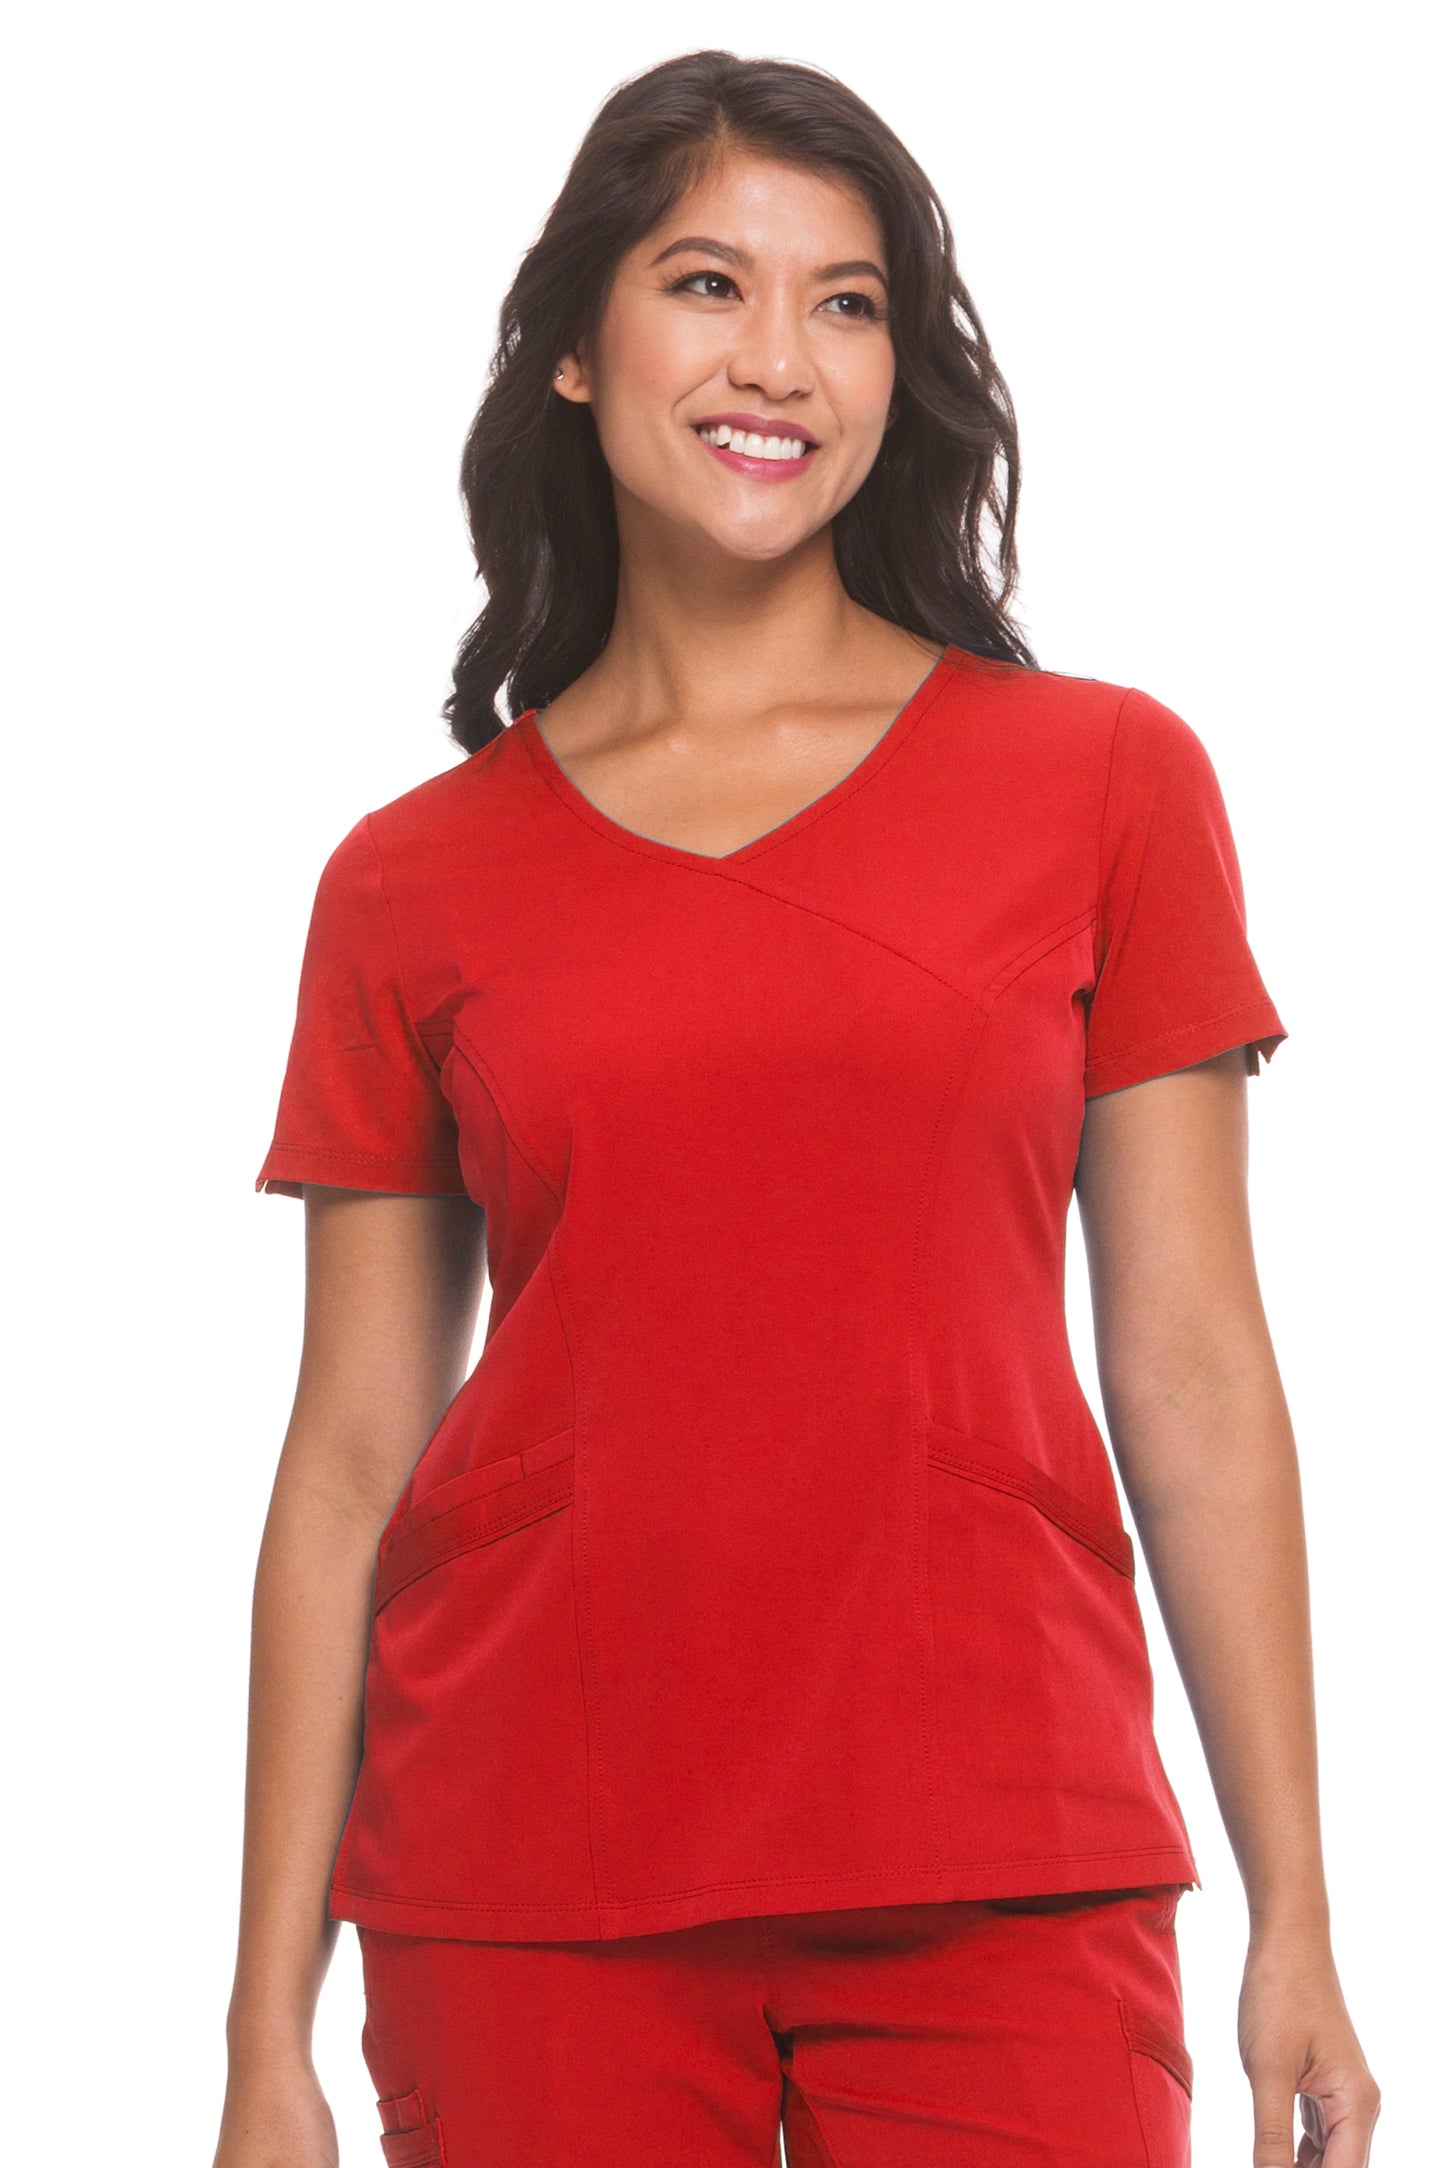 Healing Hands HH Works Madison Mock Wrap Scrub Top in Red at Parker's Clothing and Shoes